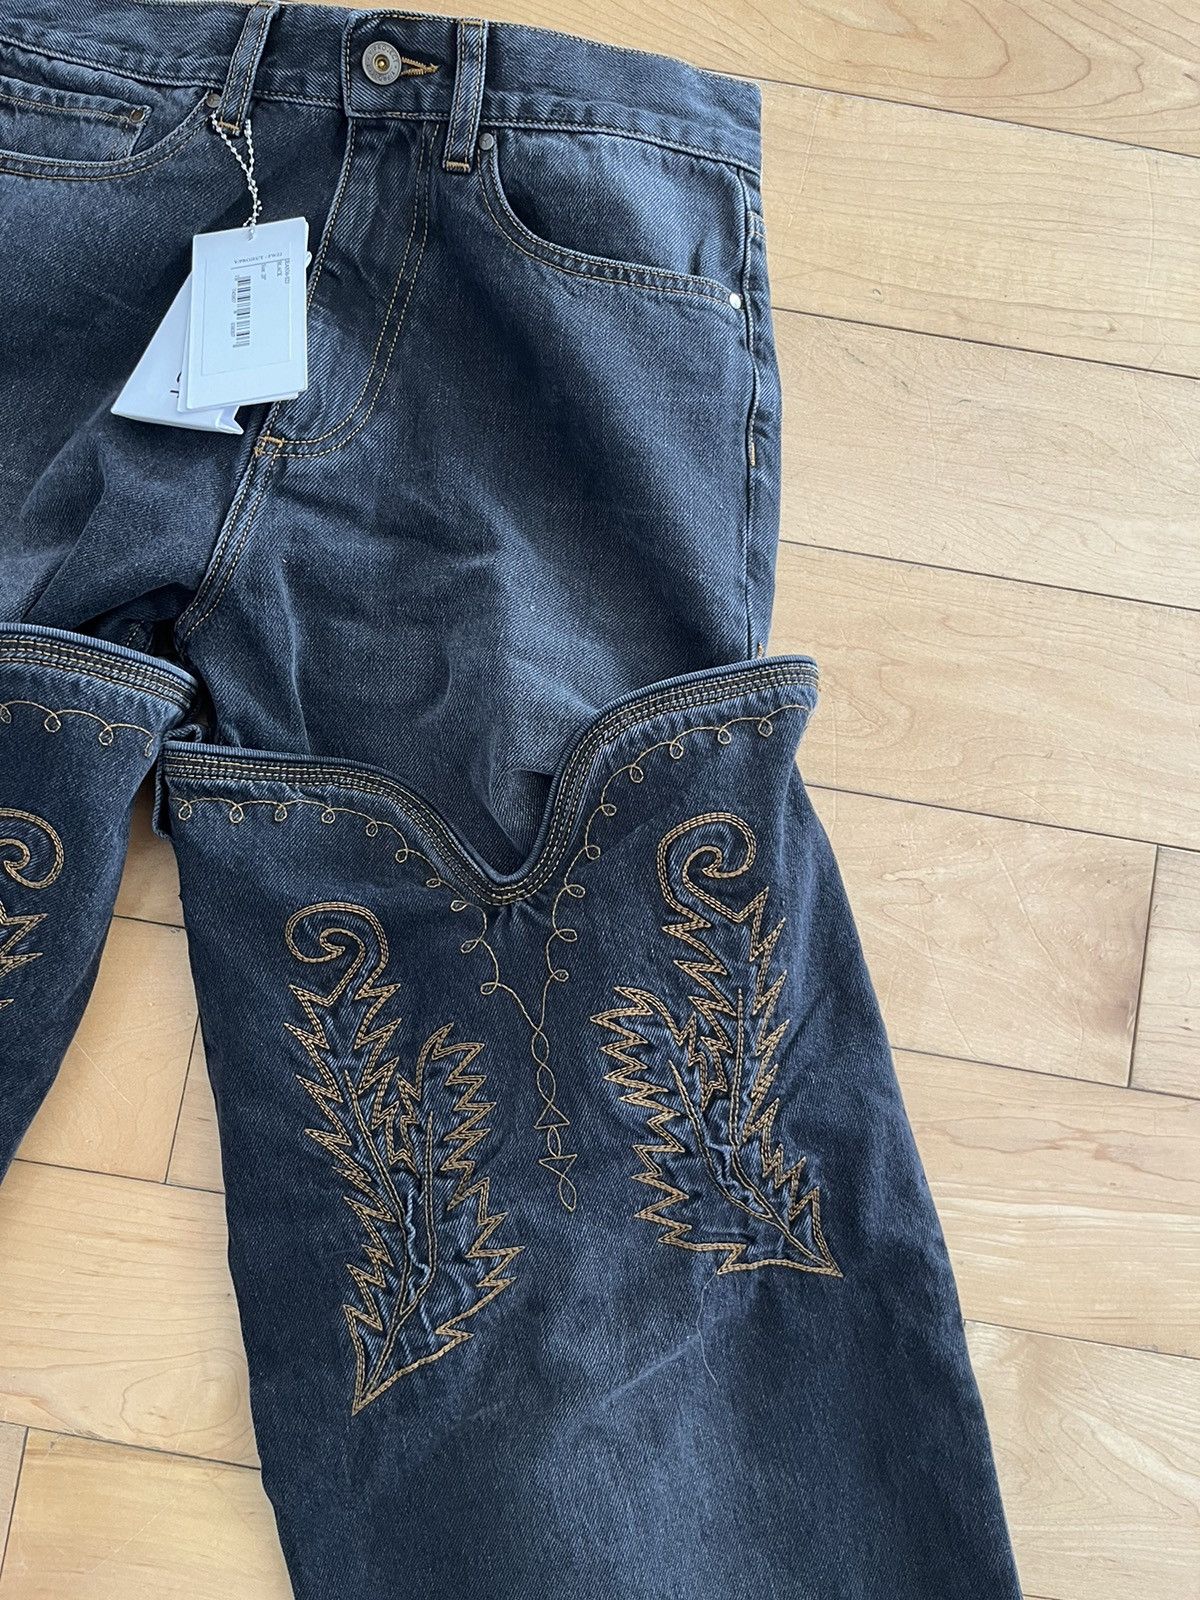 NWT - Y/PROJECT High Cowboy Jeans - 3